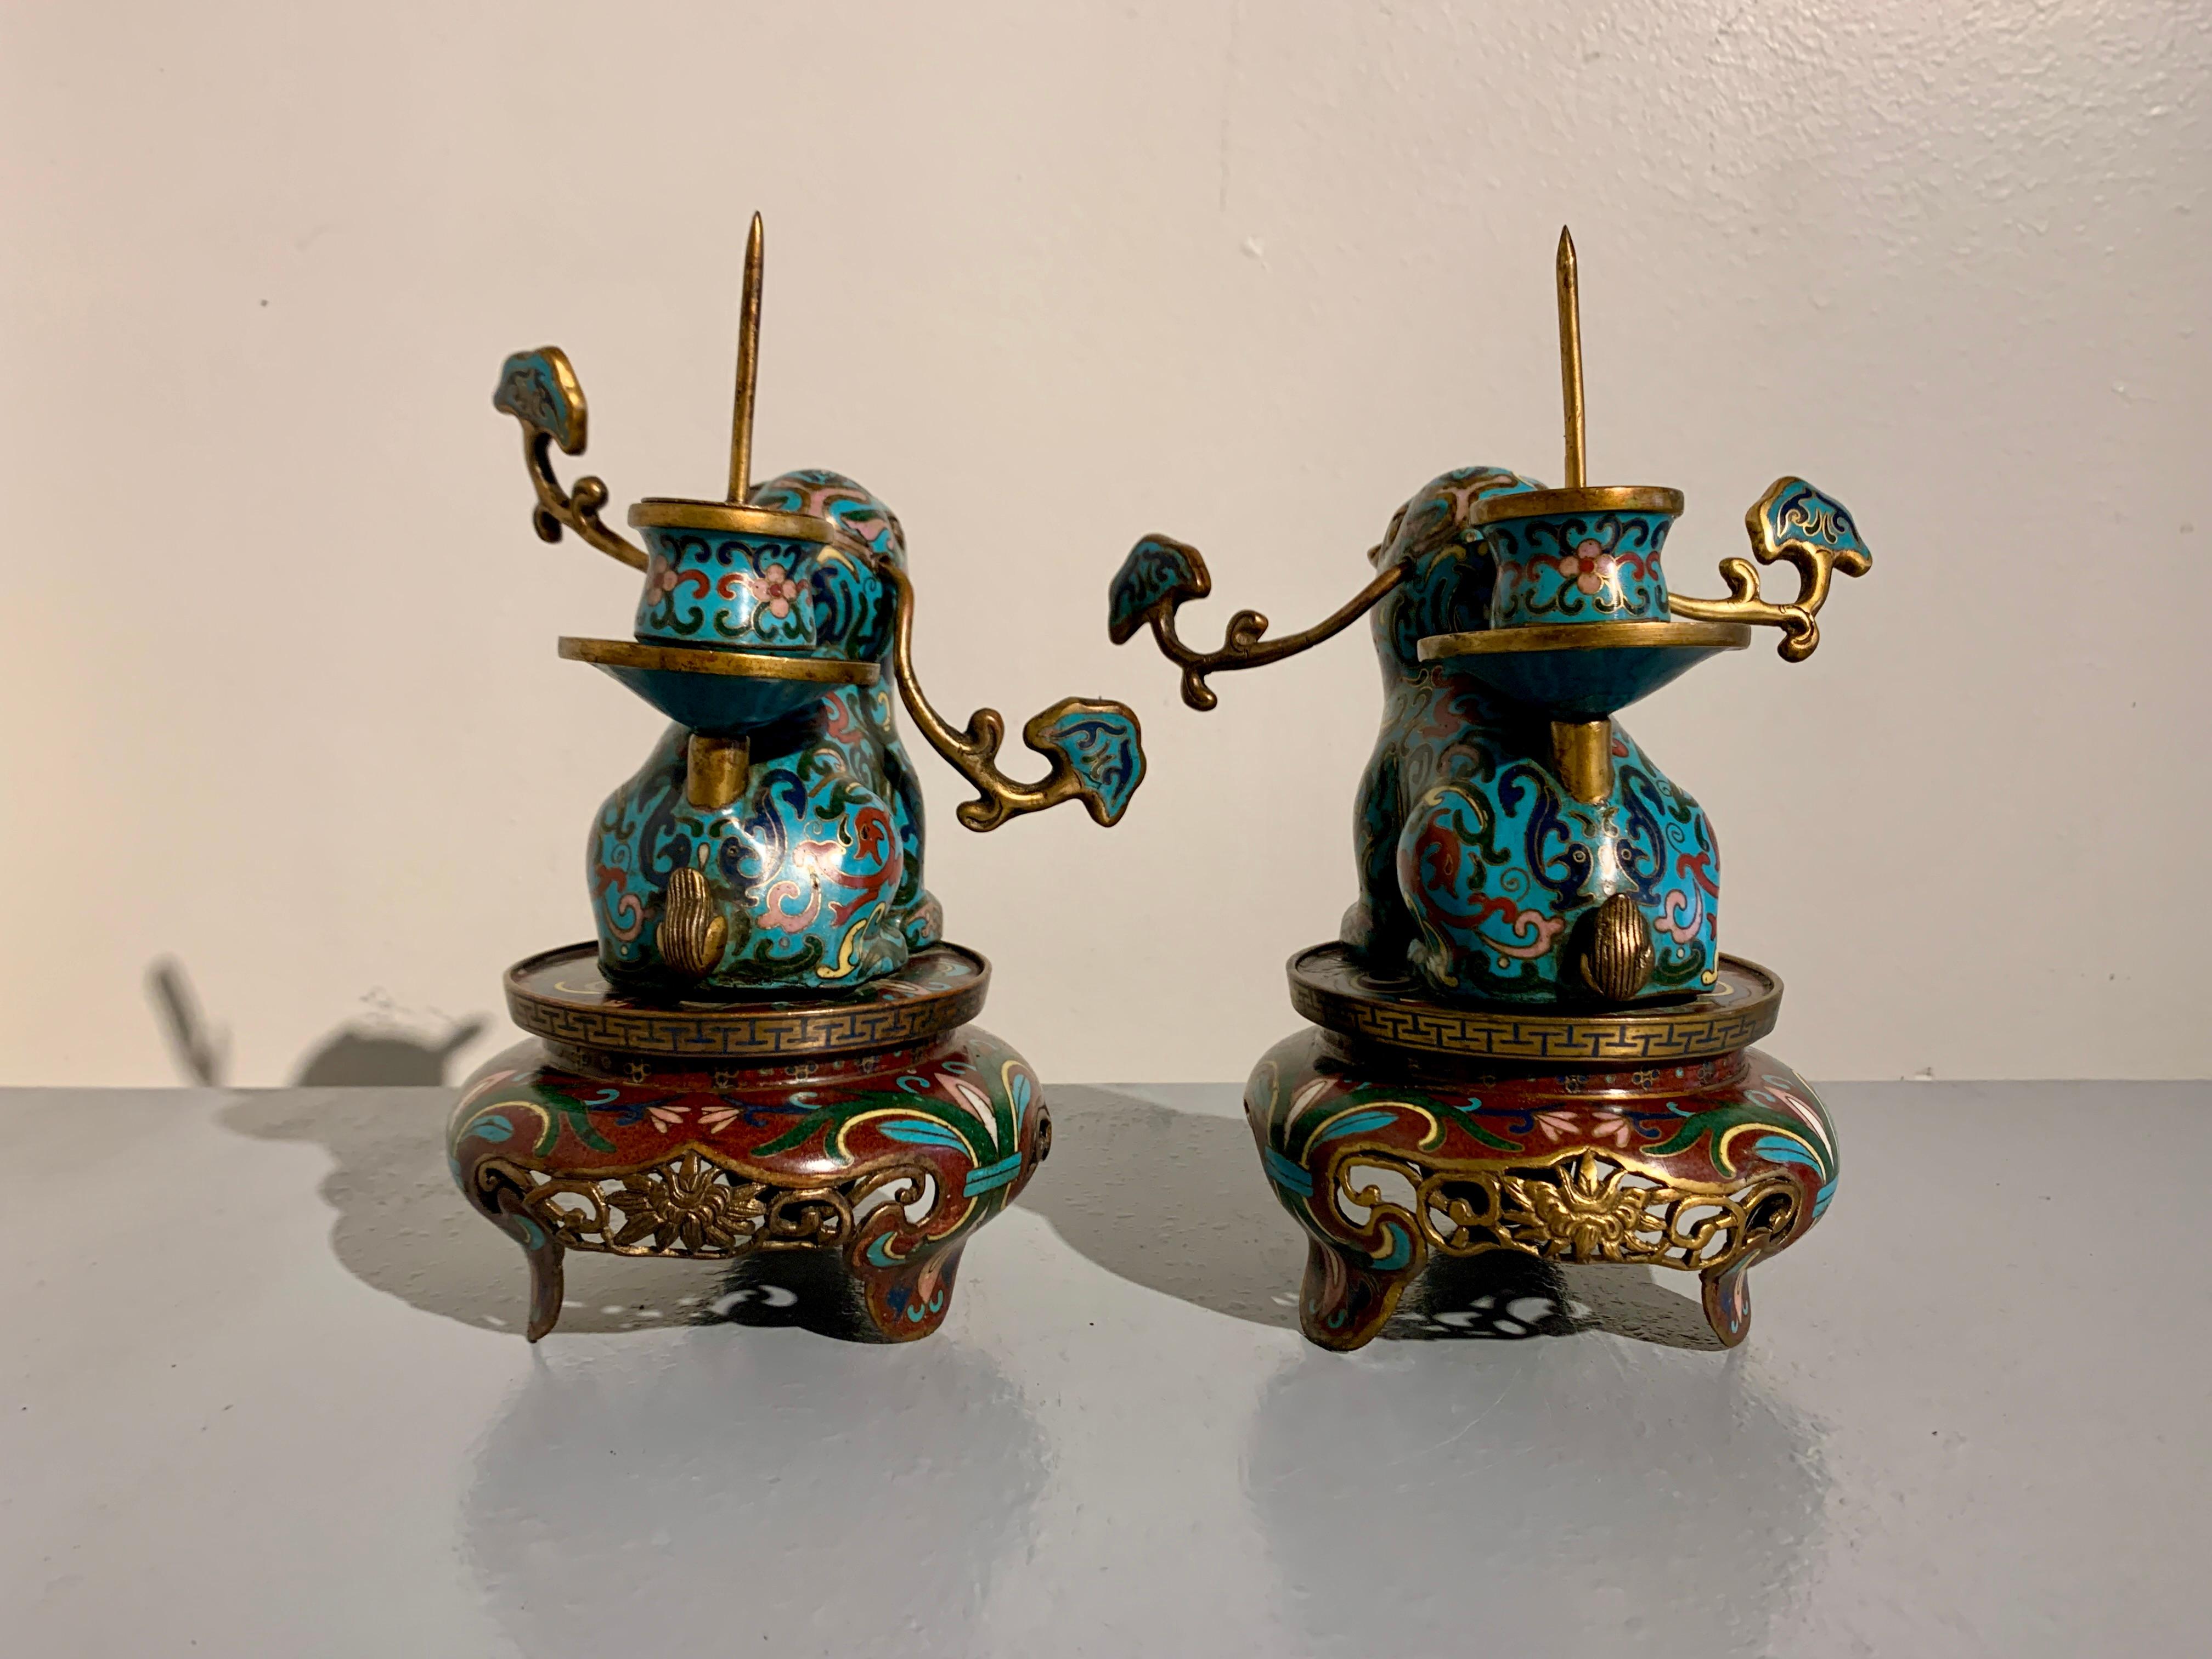 A delightful pair of Chinese cloisonne candlesticks in the form of tapirs, Late Qing Dynasty, circa 1900, China.

The charming pair of candlesticks each crafted as a tapir seated upon a round table-form pedestal. The tapirs rest upon their haunches,